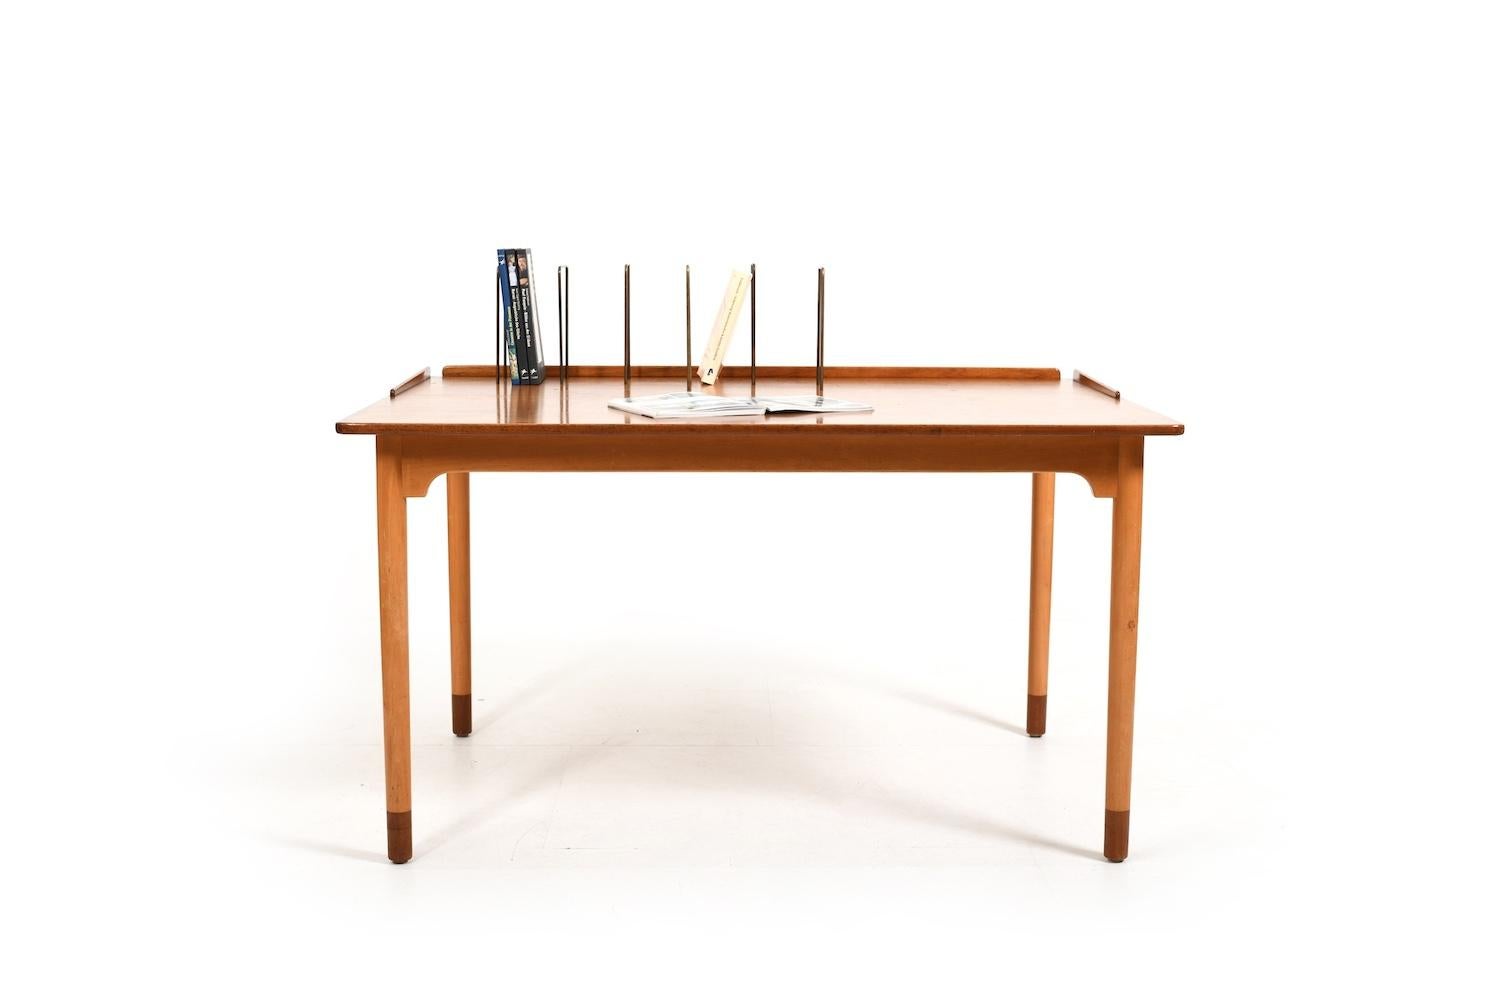 Very rare Børge Mogensen desk / library table in teak and beech. Designed in 1940s and produced by FDB Møbler Denmark. Desk plate and end of legs in teak. With brass bookholders, that can be freely plugged in. C.1950. Note: the last photo is a old